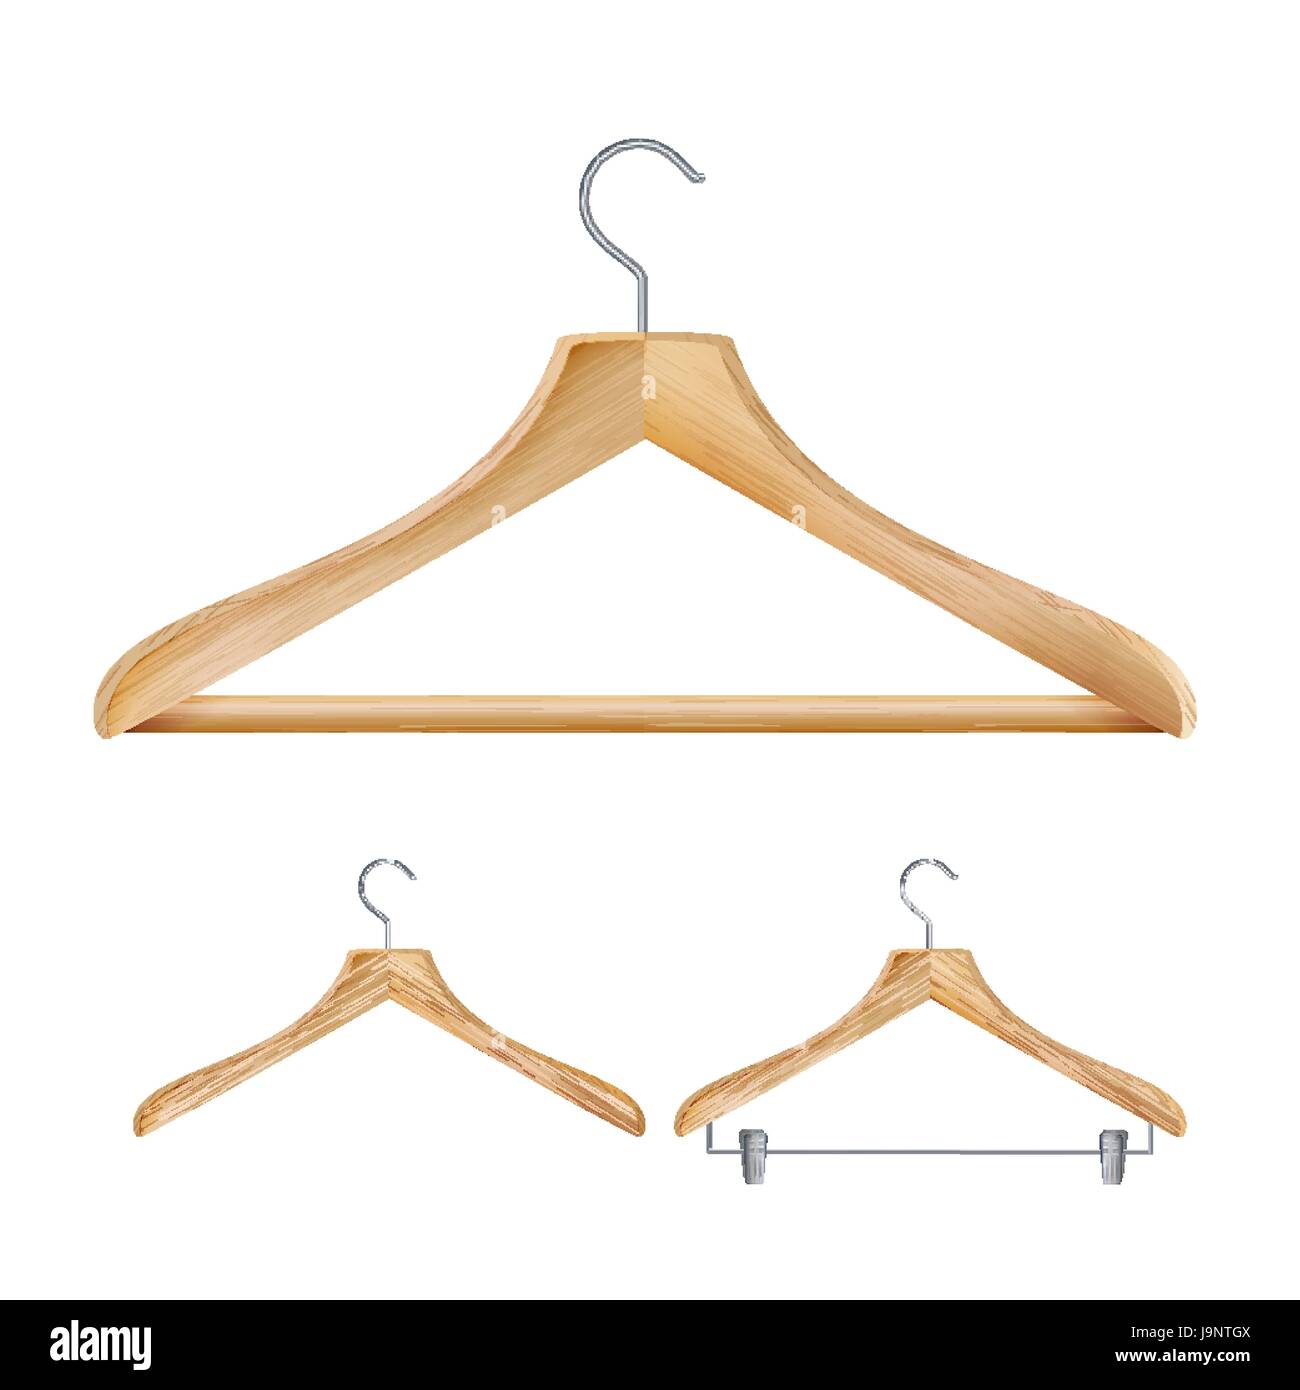 Wooden Clothes Hangers Vector. Illustration Of Classic Clothes Hanger Isolated Stock Vector